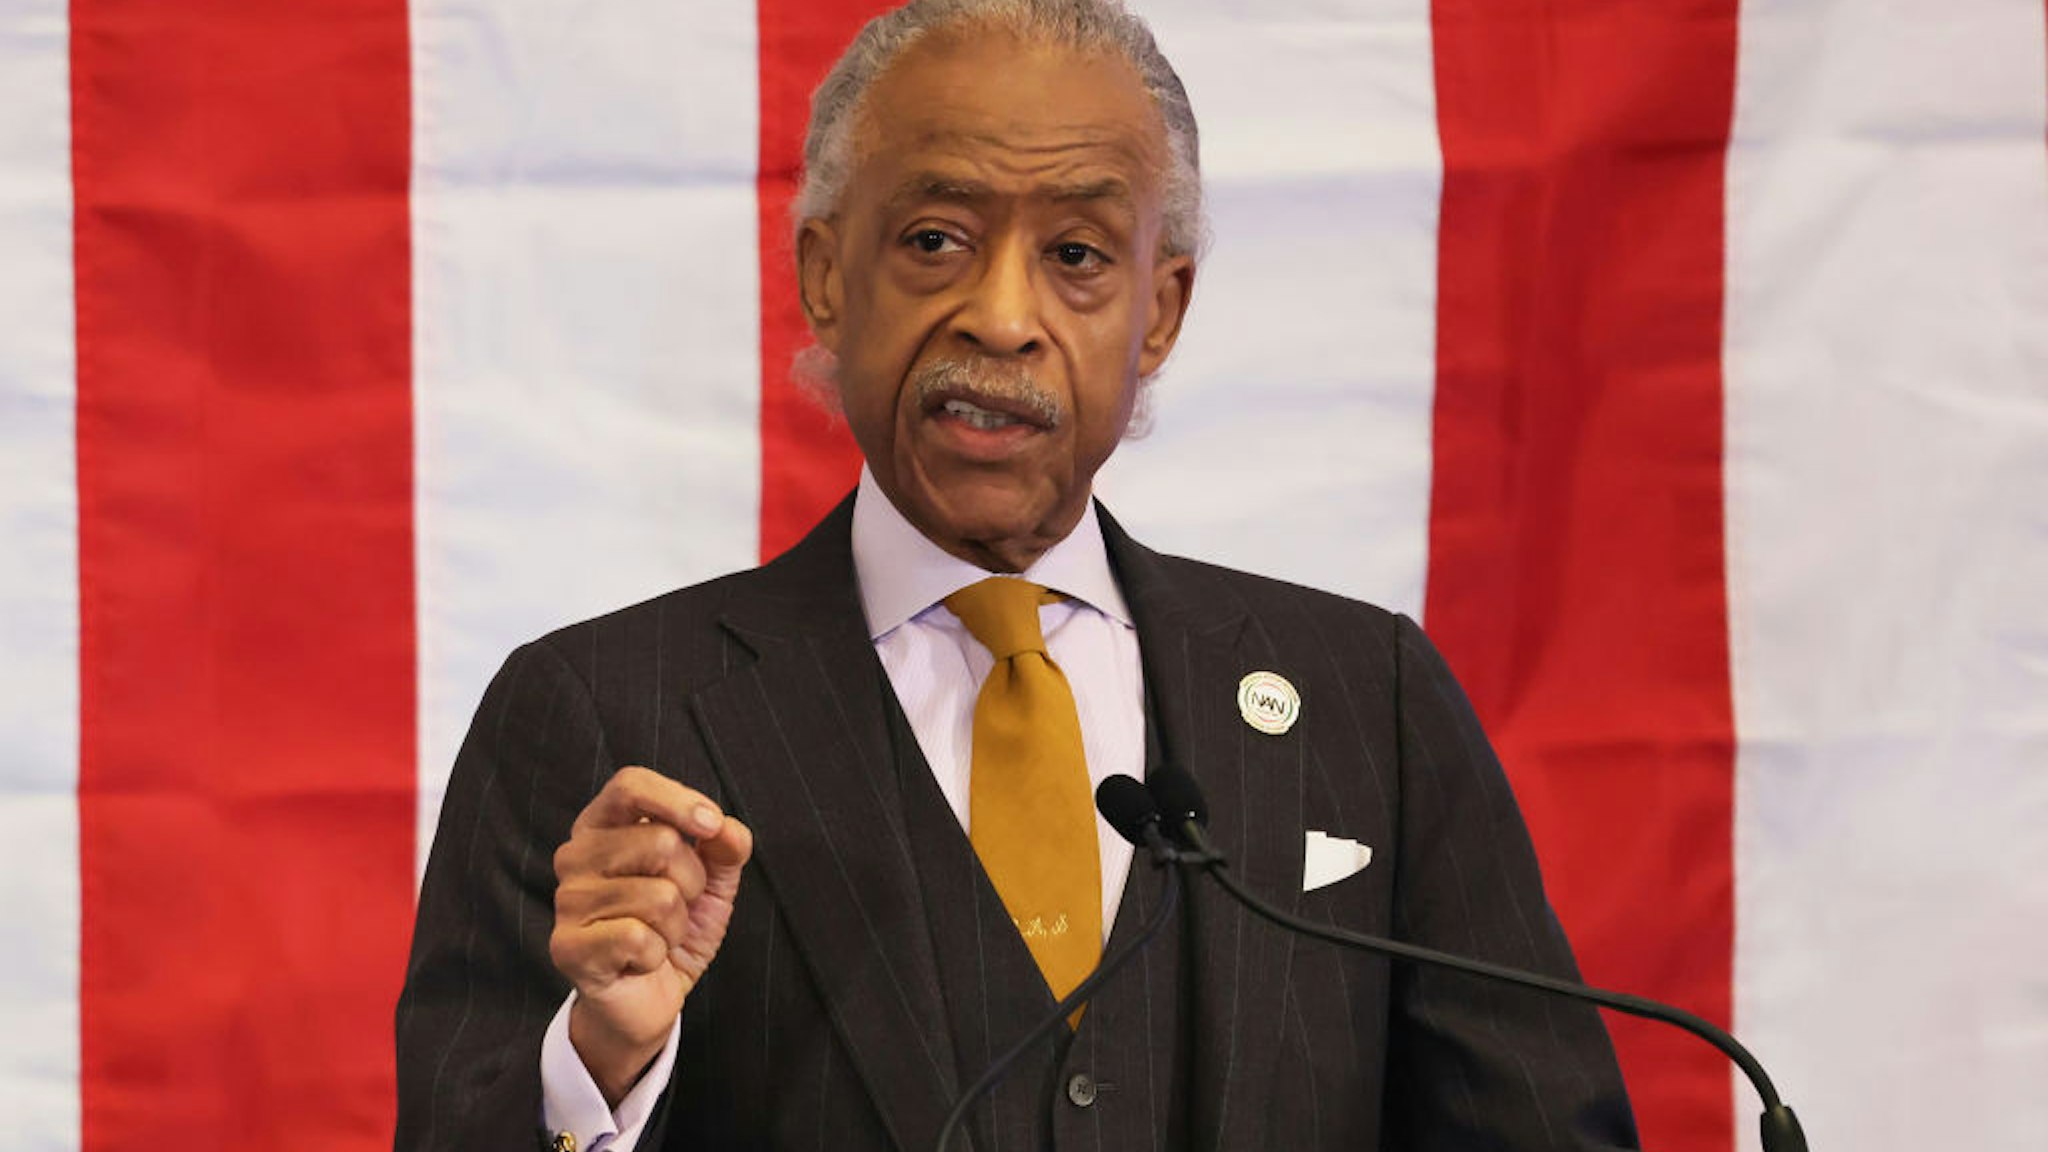 NEW YORK, NEW YORK - DECEMBER 19: Founder and president of the National Action Network Rev. Al Sharpton speaks during a press conference and signing of legislation creating a commission for the study of reparations in New York on December 19, 2023 in New York City. Gov. Hochul was joined by Rev. Al Sharpton, various members of NY government leadership and influential community members six months after state lawmakers passed the bill and three years after California became the first state to create a reparations task force. The bill creates a nine-member commission that would study the effects of slavery in the state and make non-binding recommendations on reparations. Three members would be appointed by the governor, three by the assembly and three by the senate. (Photo by Michael M. Santiago/Getty Images)